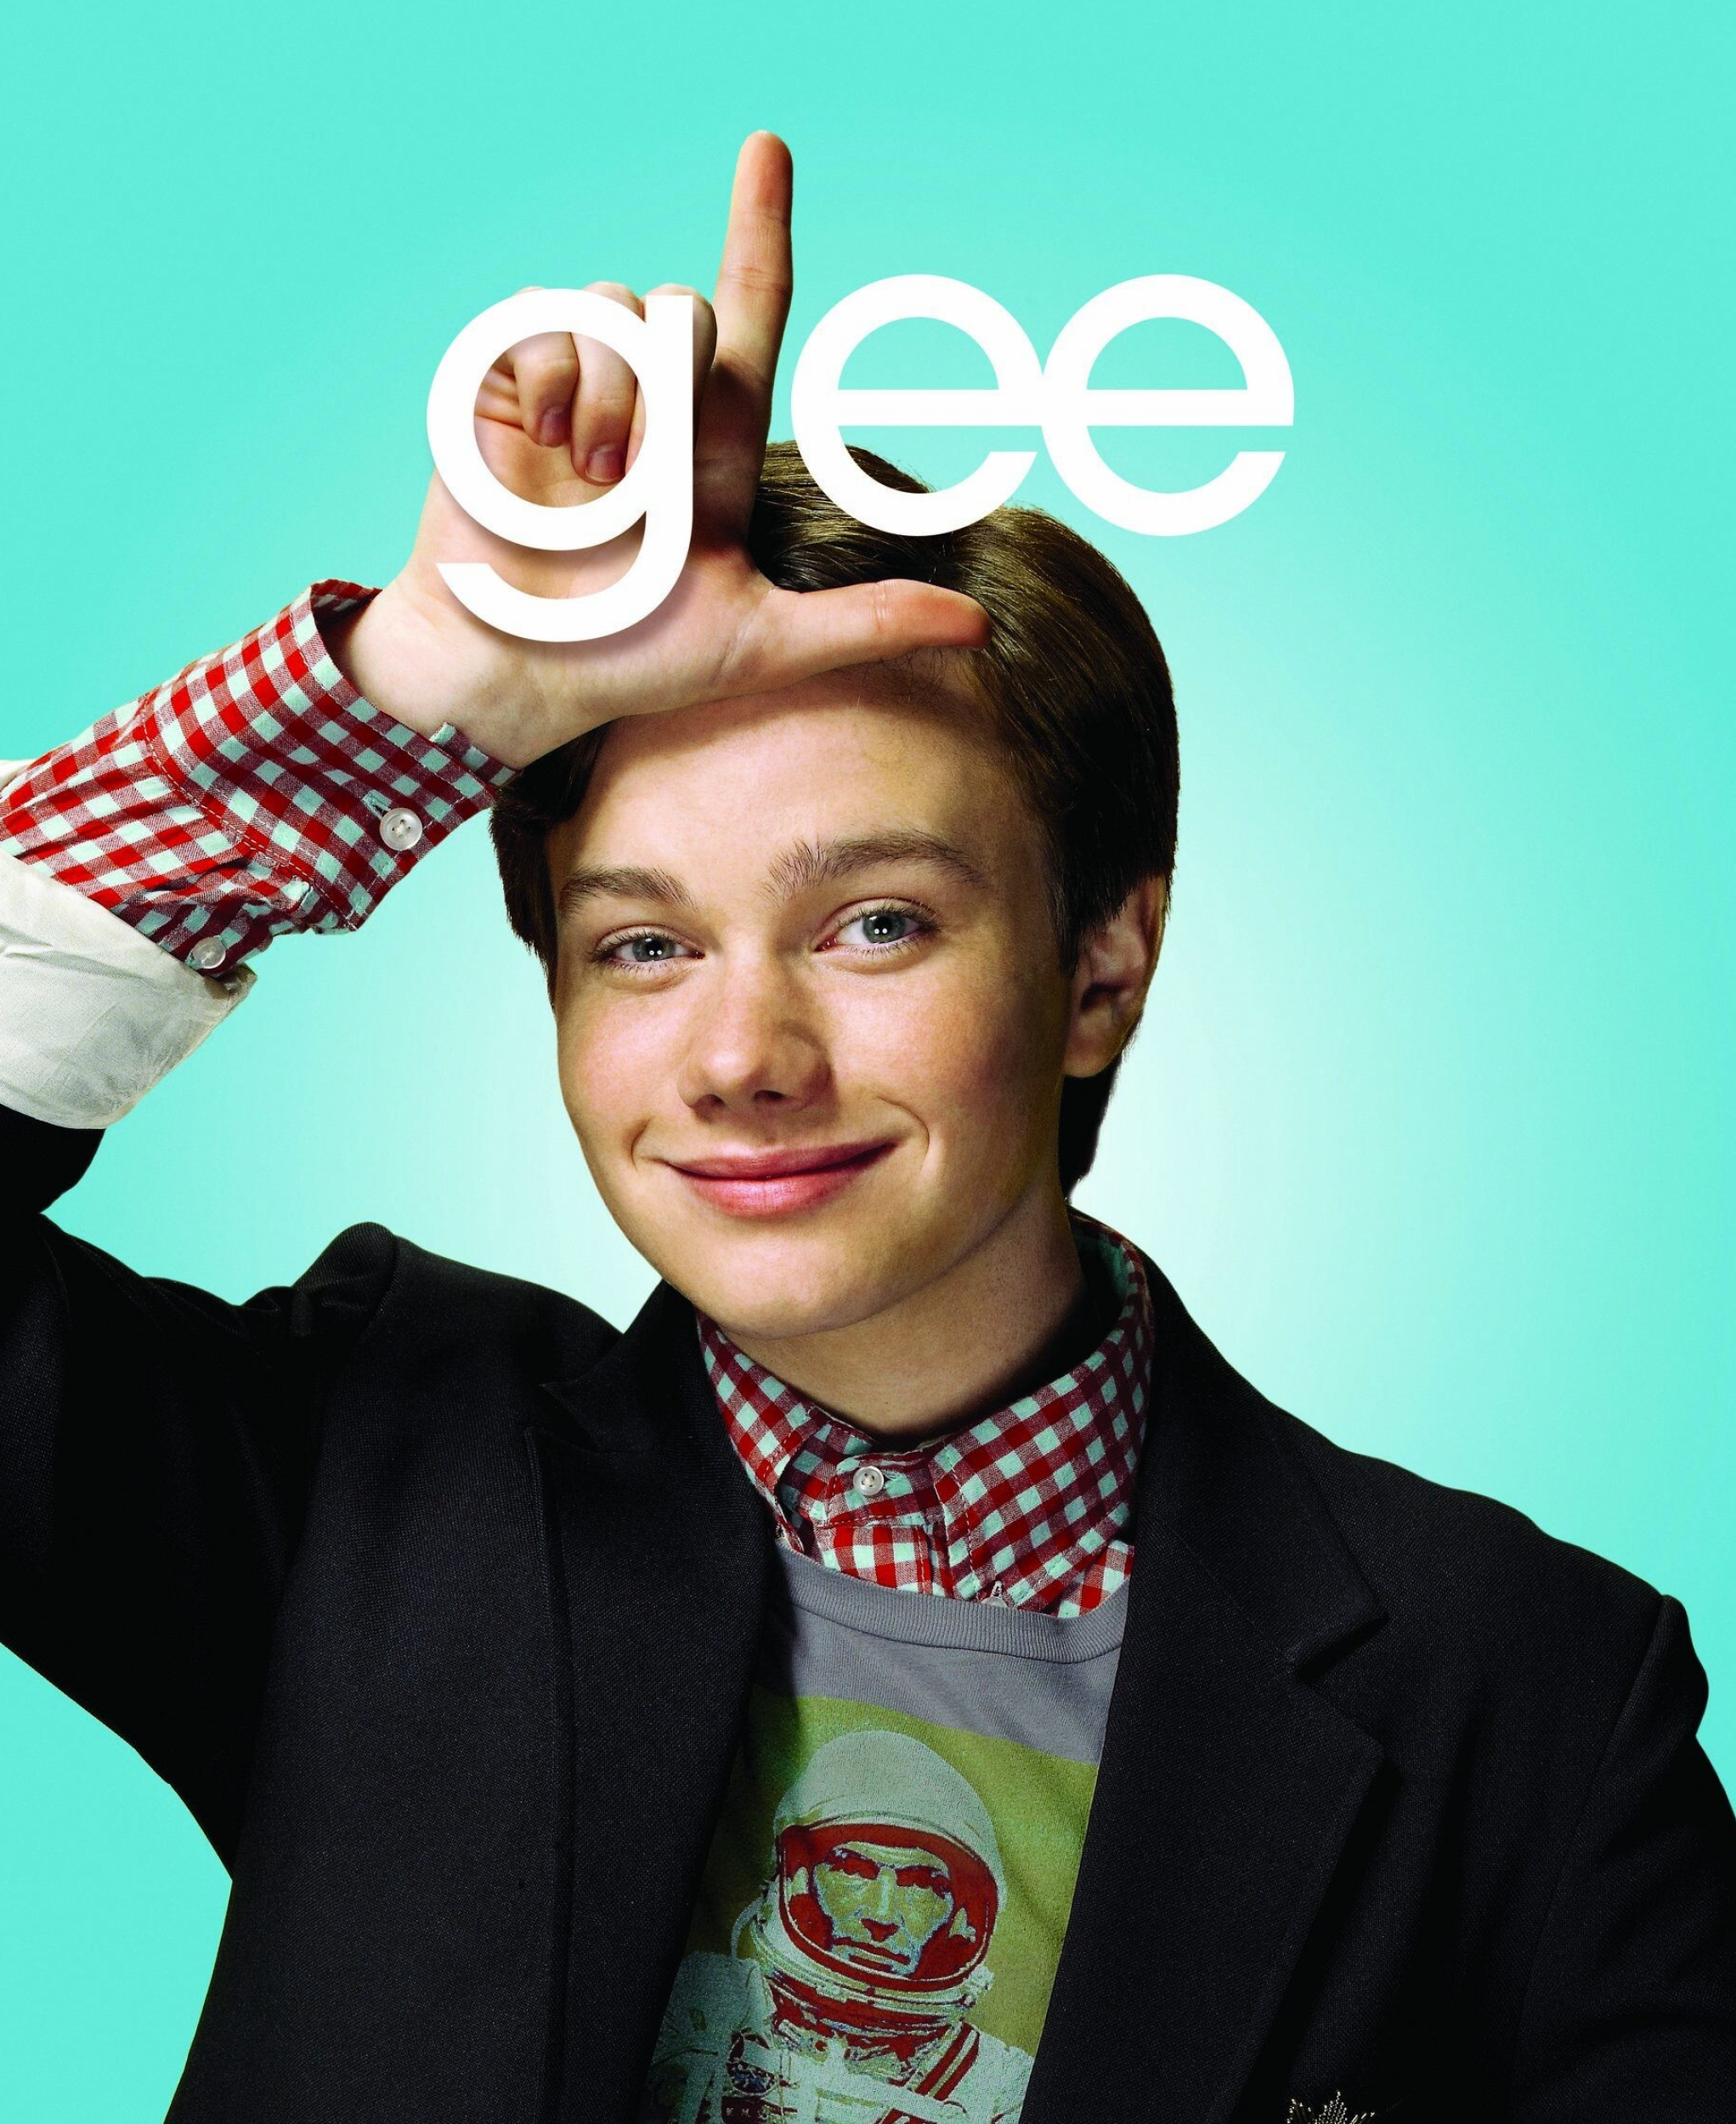 Glee (TV series): Chris Colfer as Kurt Hummel, A fashionable gay countertenor who is routinely bullied at school. 2050x2500 HD Background.